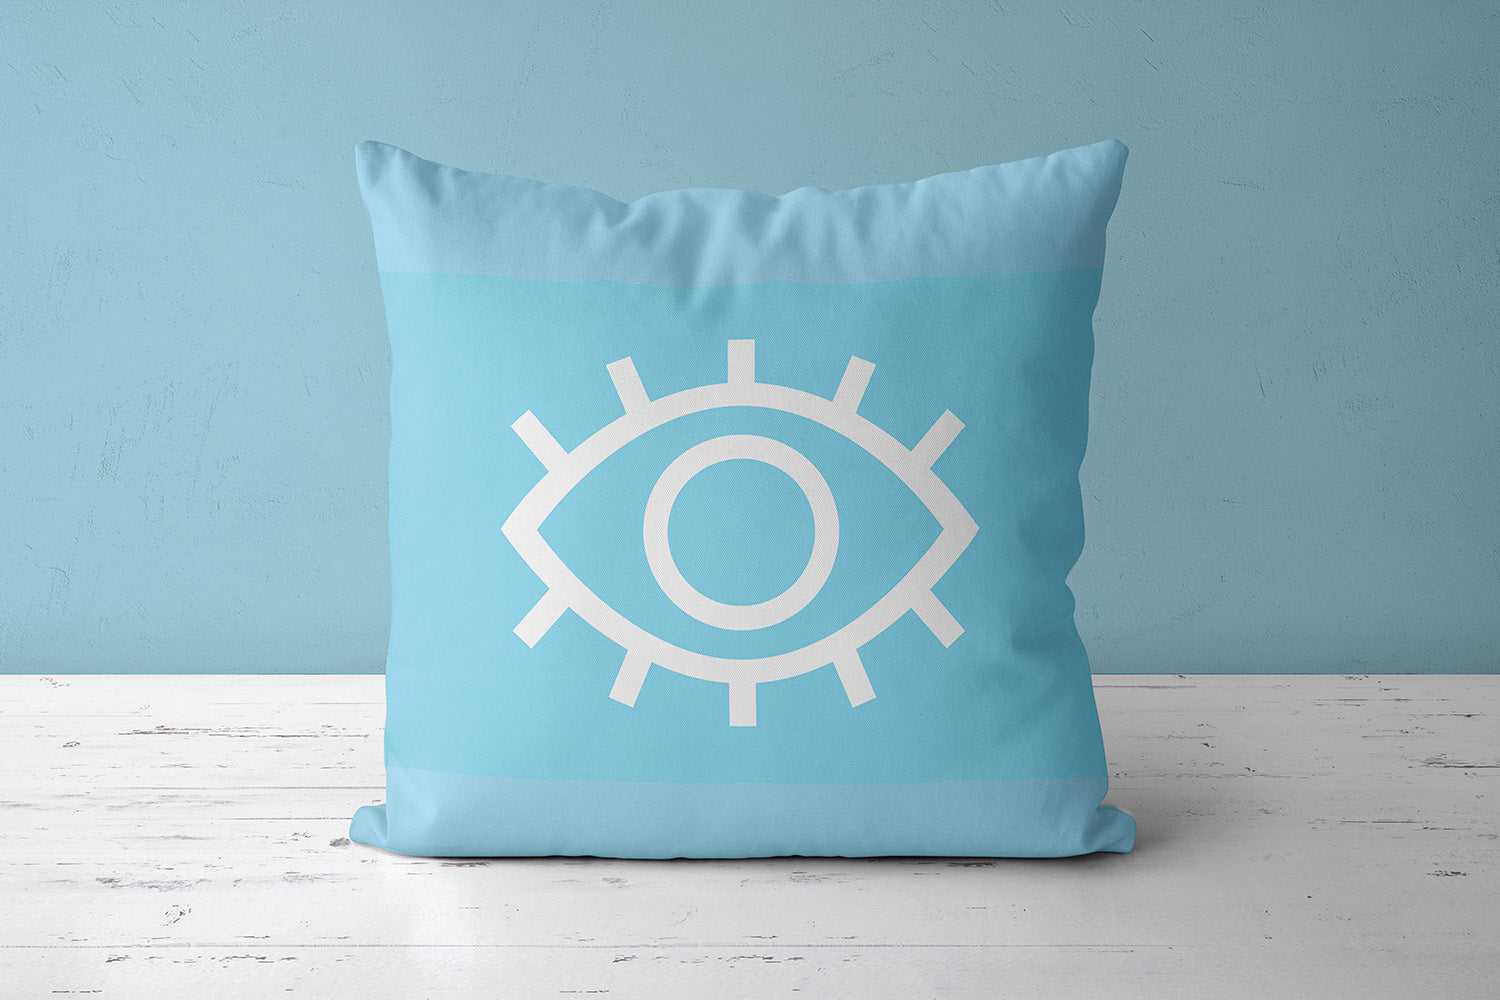 Feblilac the Eye of the Blue Devil Cushion Covers Throw Pillow Covers